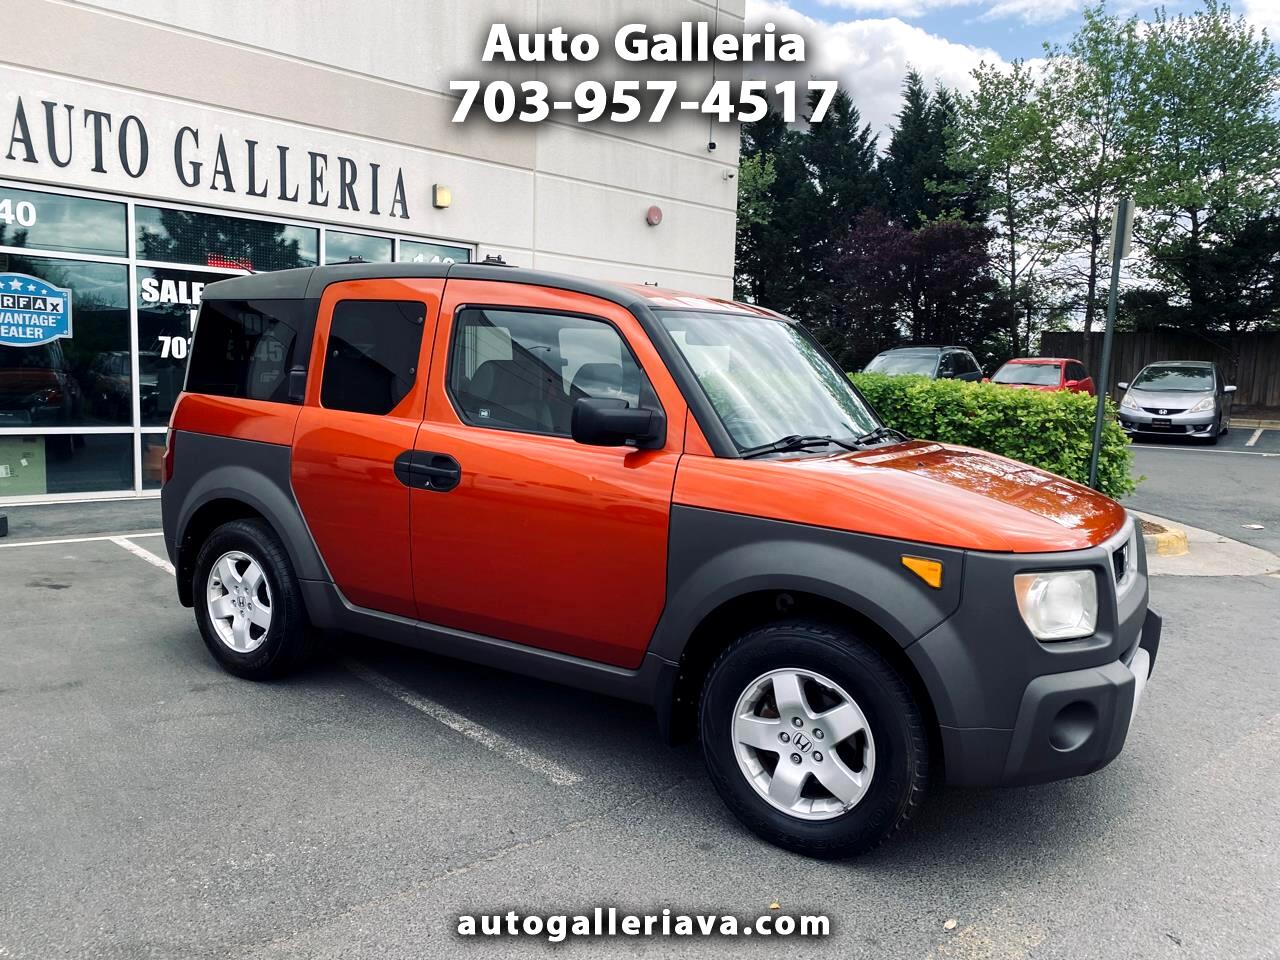 2004 Honda Element EX 4WD w/ Front Side Airbags